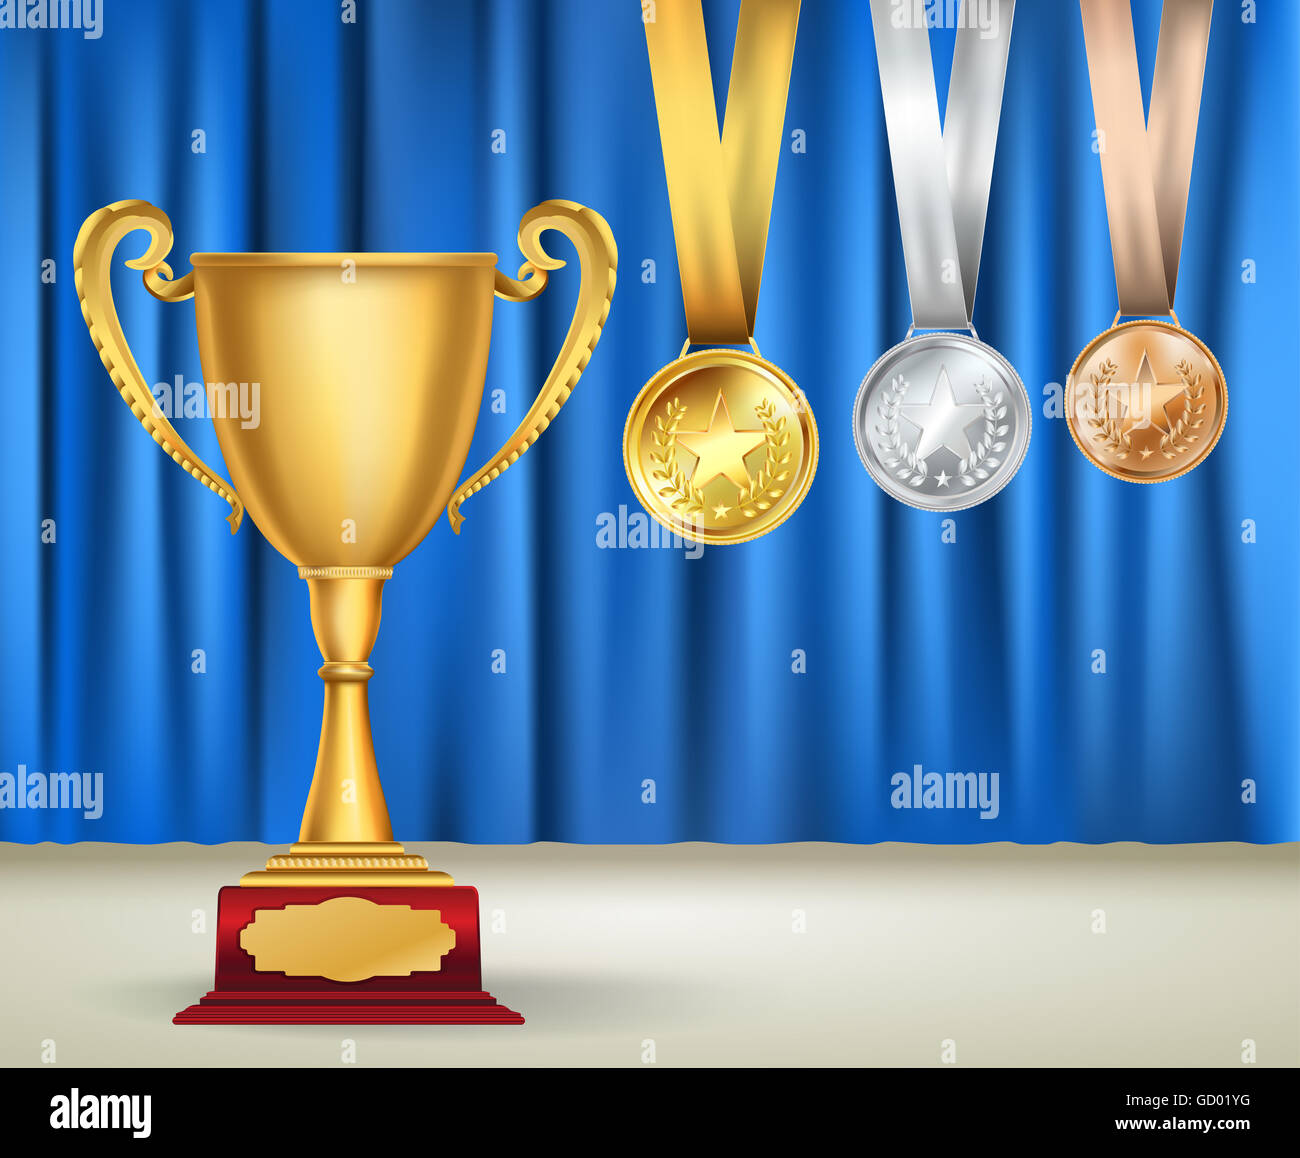 Golden trophy cup and set of medals with ribbons on blue curtain background. Sports competition awards collection Stock Photo